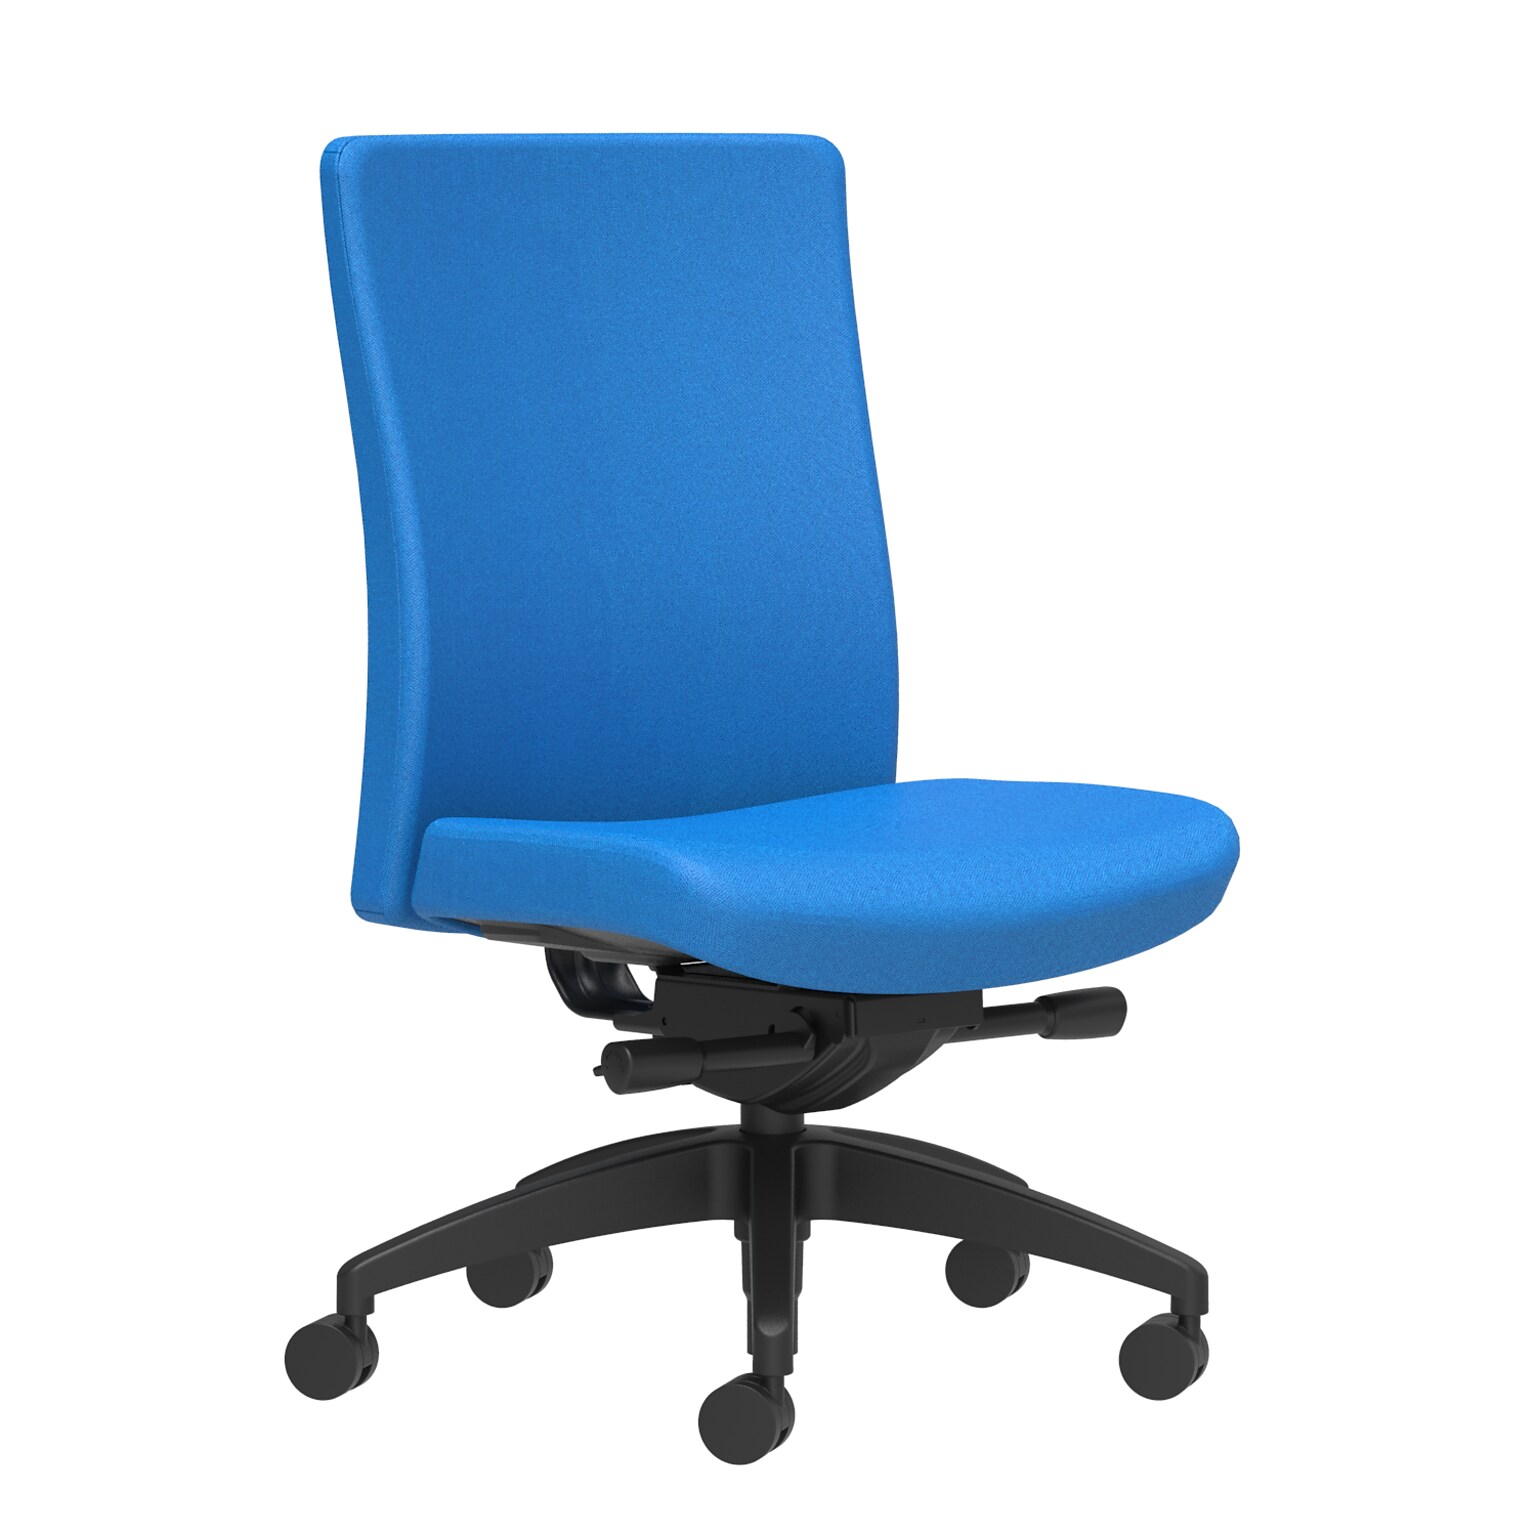 Union & Scale Workplace2.0™ Task Chair Upholstered, Armless, Cobalt Fabric, Synchro Tilt Seat Slide (54195)